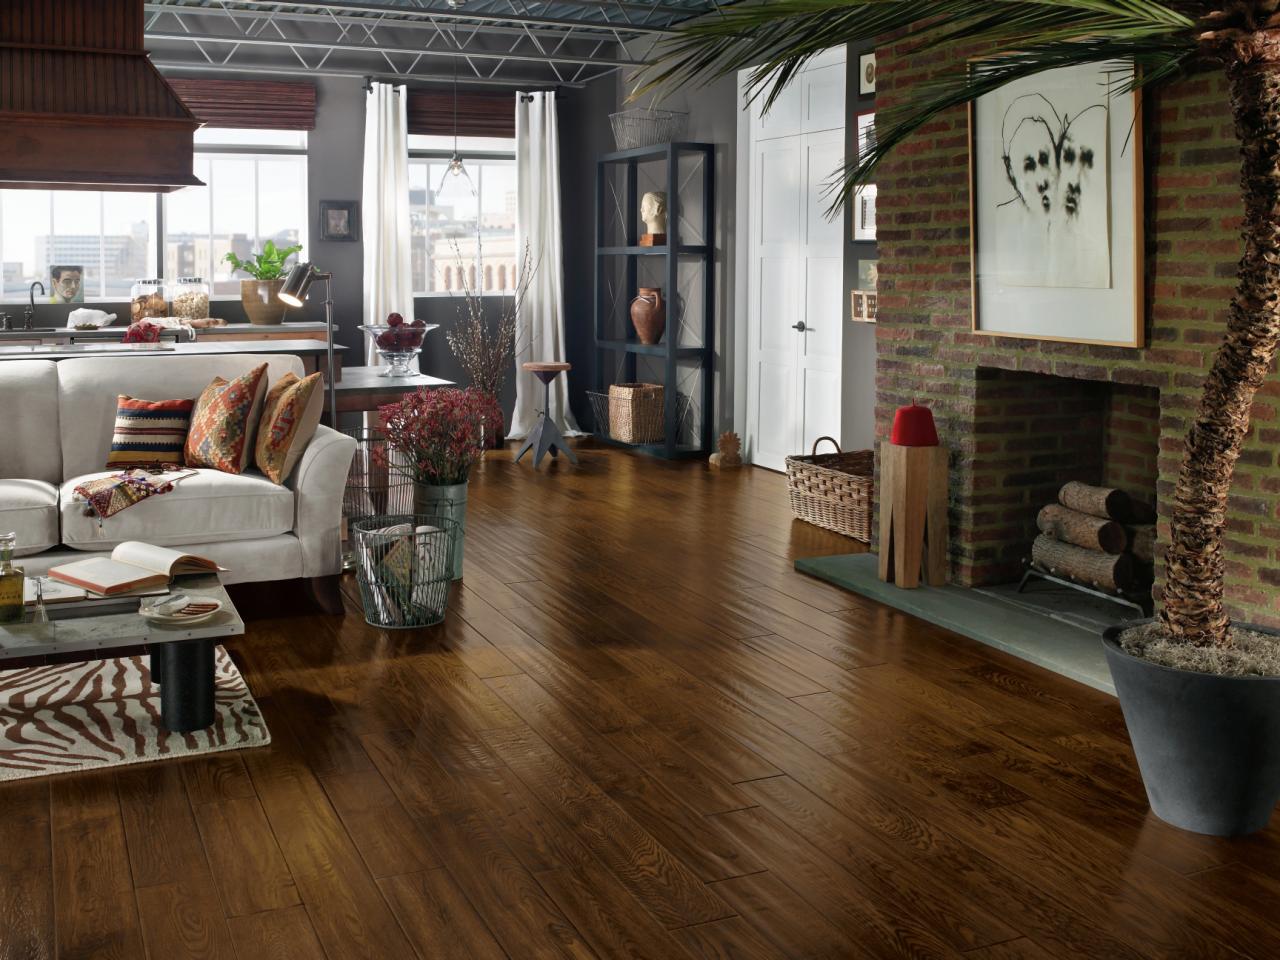 Top Living Room Flooring Options, What Is The Best Flooring For Living Room